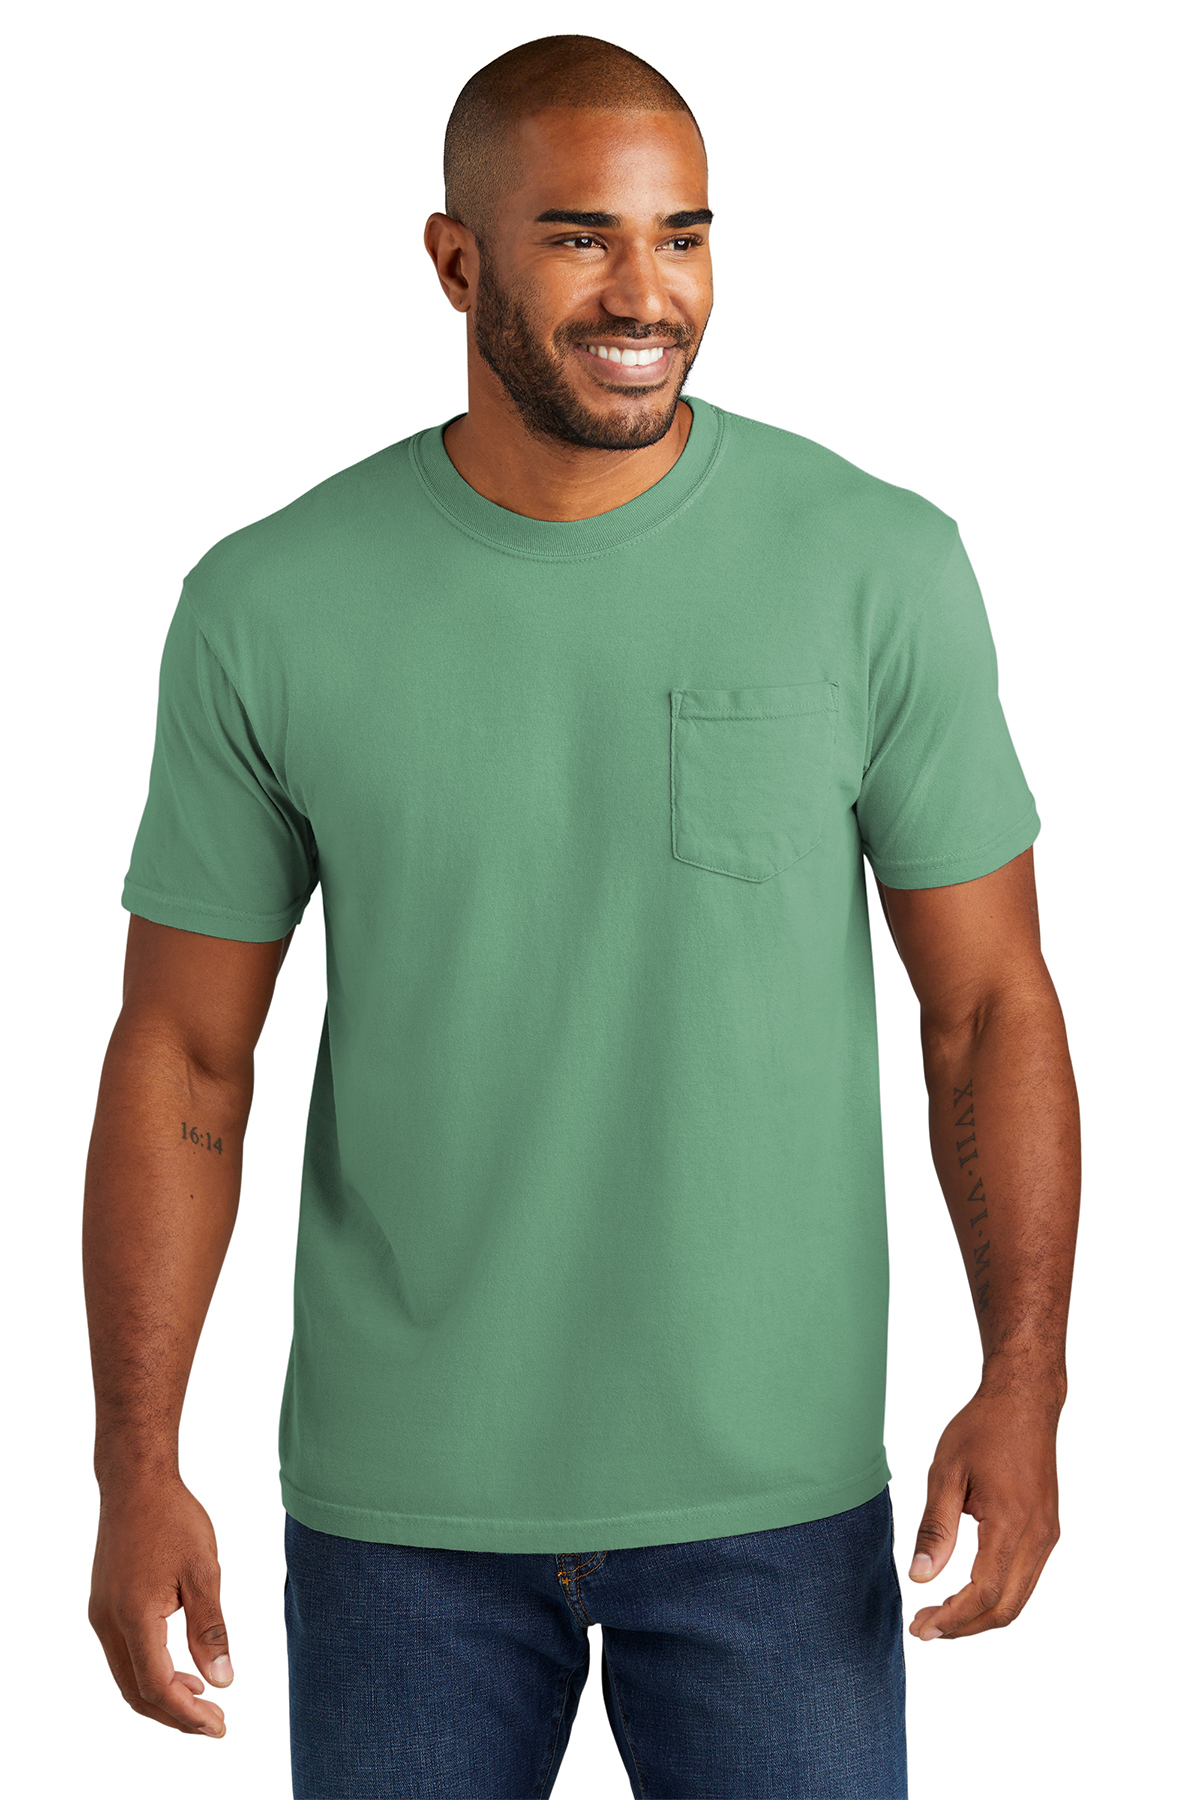 Comfort Colors C1717 Adult Heavyweight T-Shirt - Chalky Mint - S